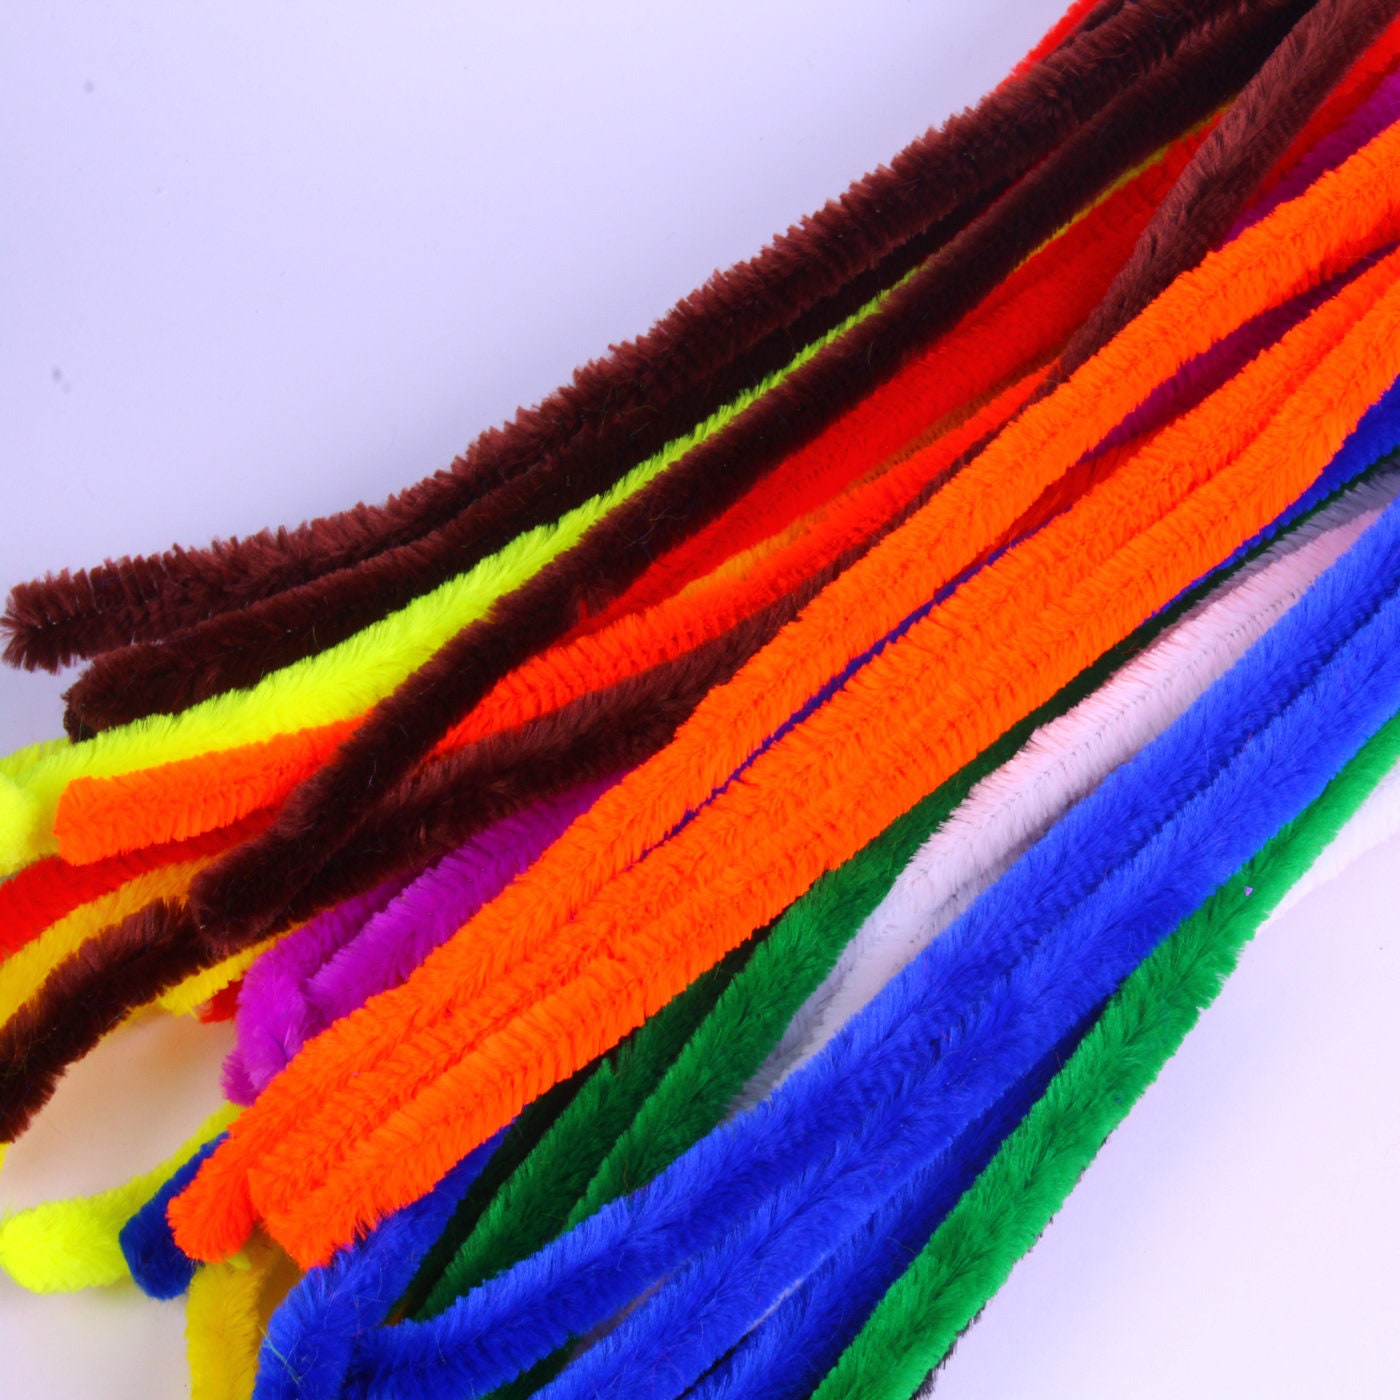 15mm Jumbo Chenille Steams Craft Pipe Cleaner Thickness 15mm -   Singapore